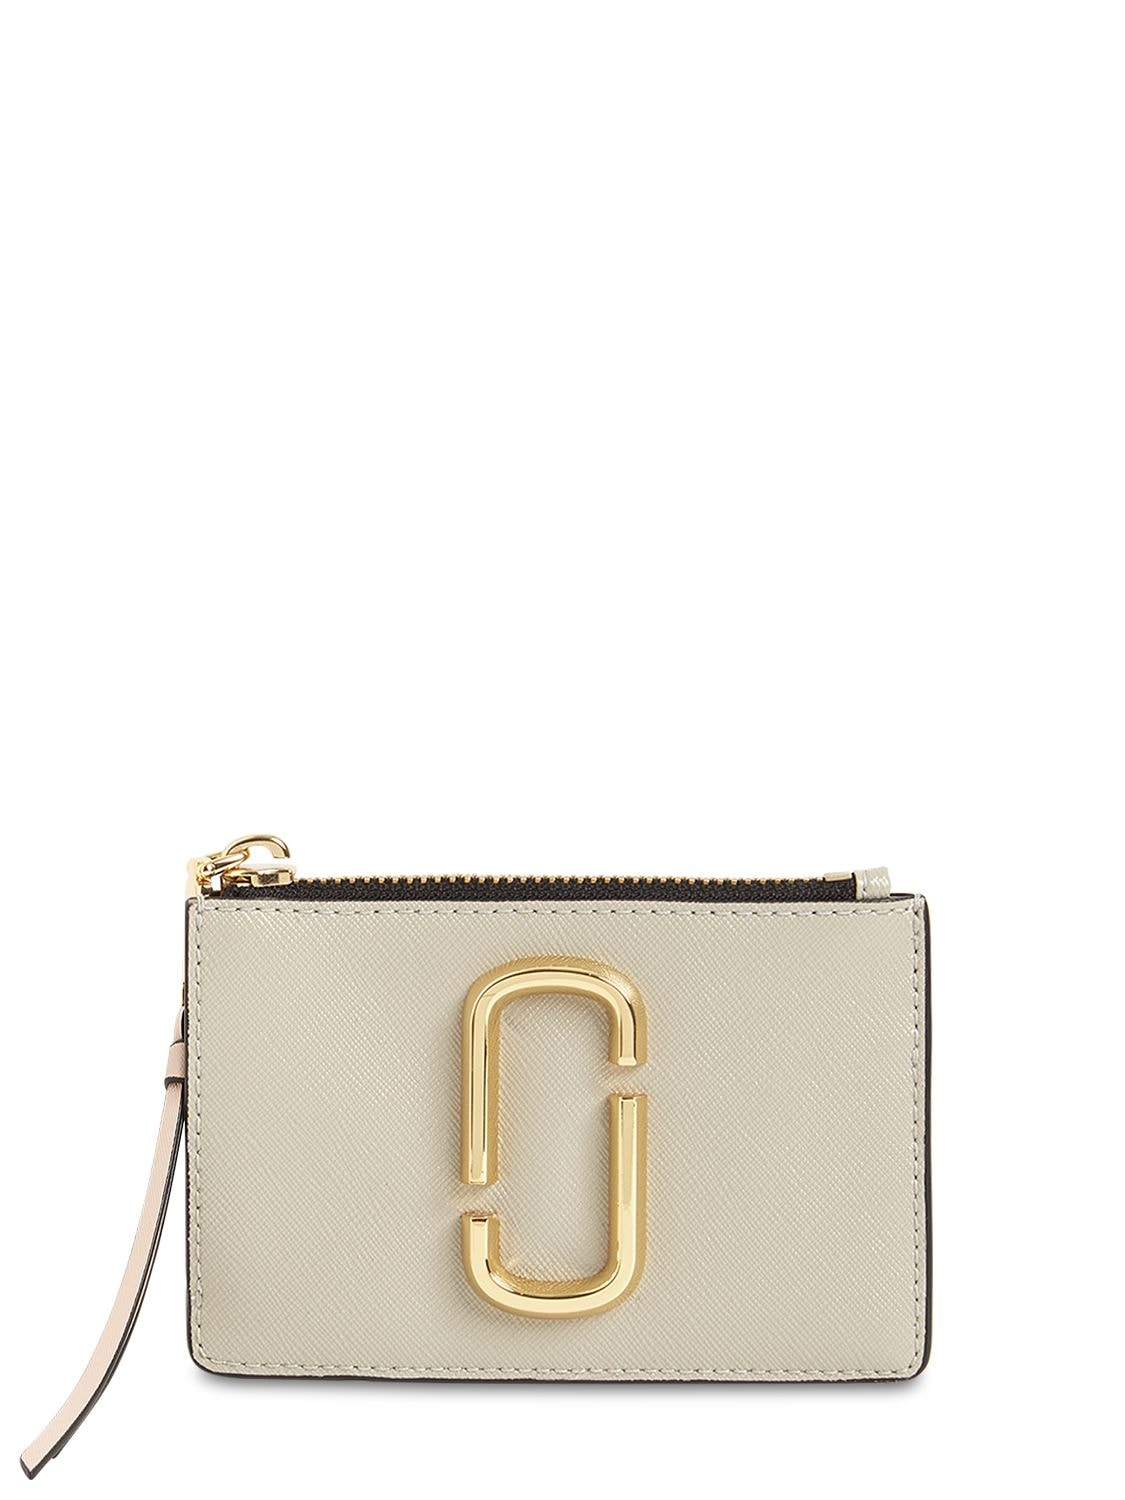 Marc Jacobs Snapshot Leather Zip Card Holder In Coconut Multi